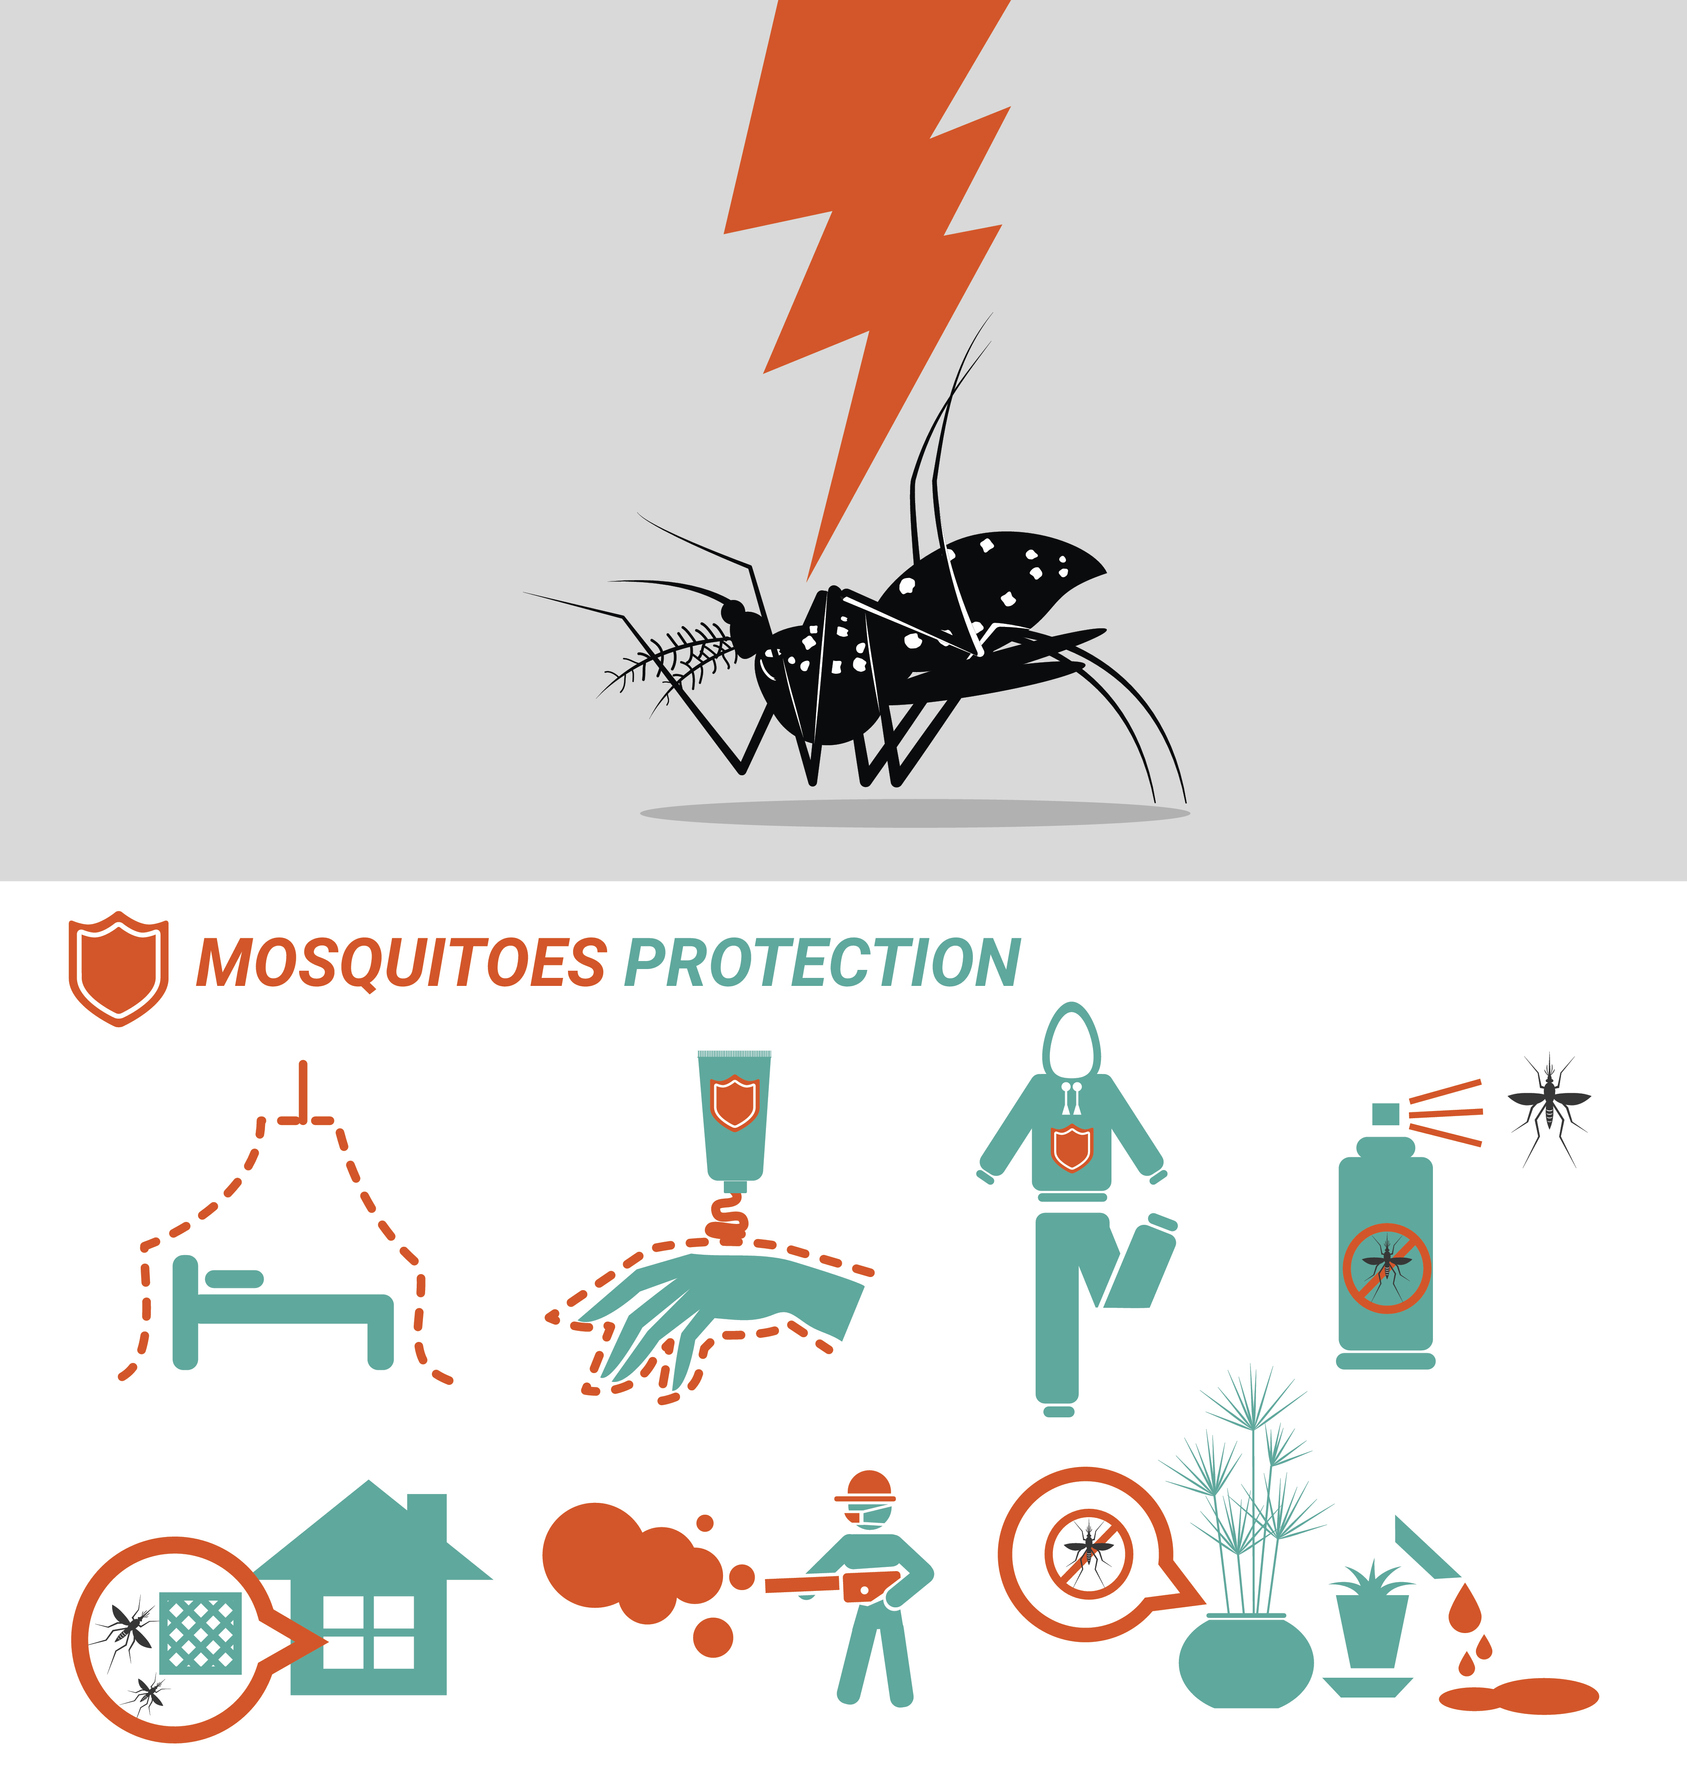 How to protect yourself from mosquitoes?